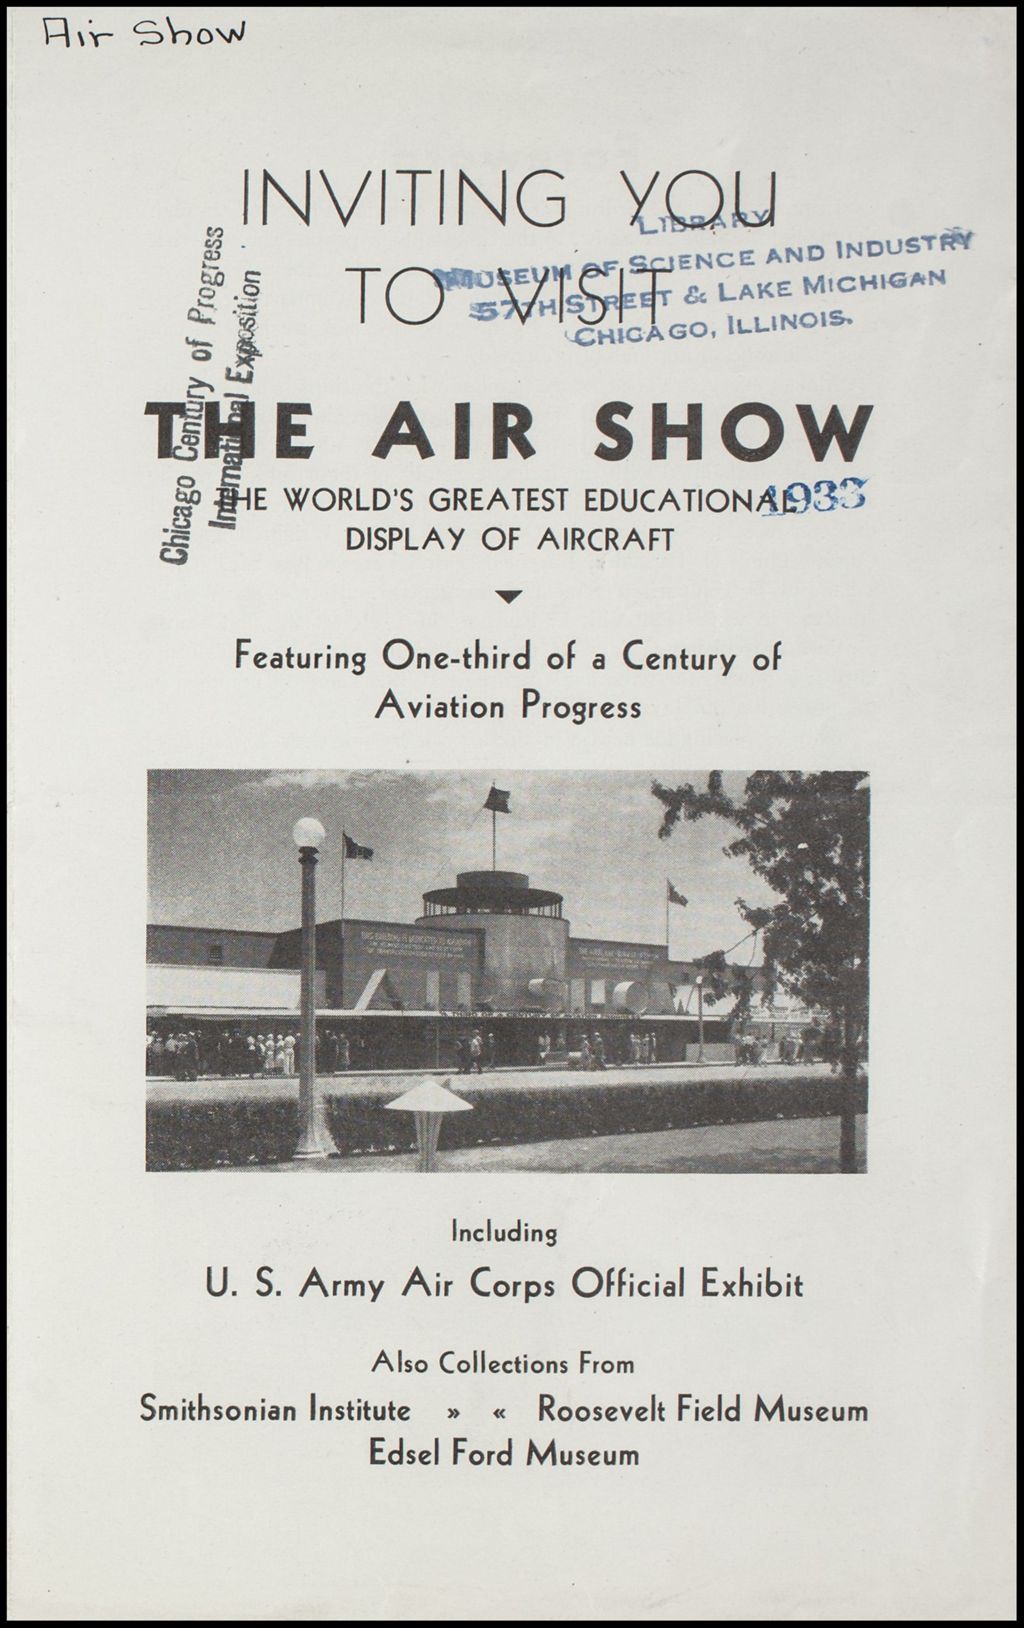 Miniature of Inviting you to visit the Air Show, the world's greatest educational display of aircraft (Folder 16-254)